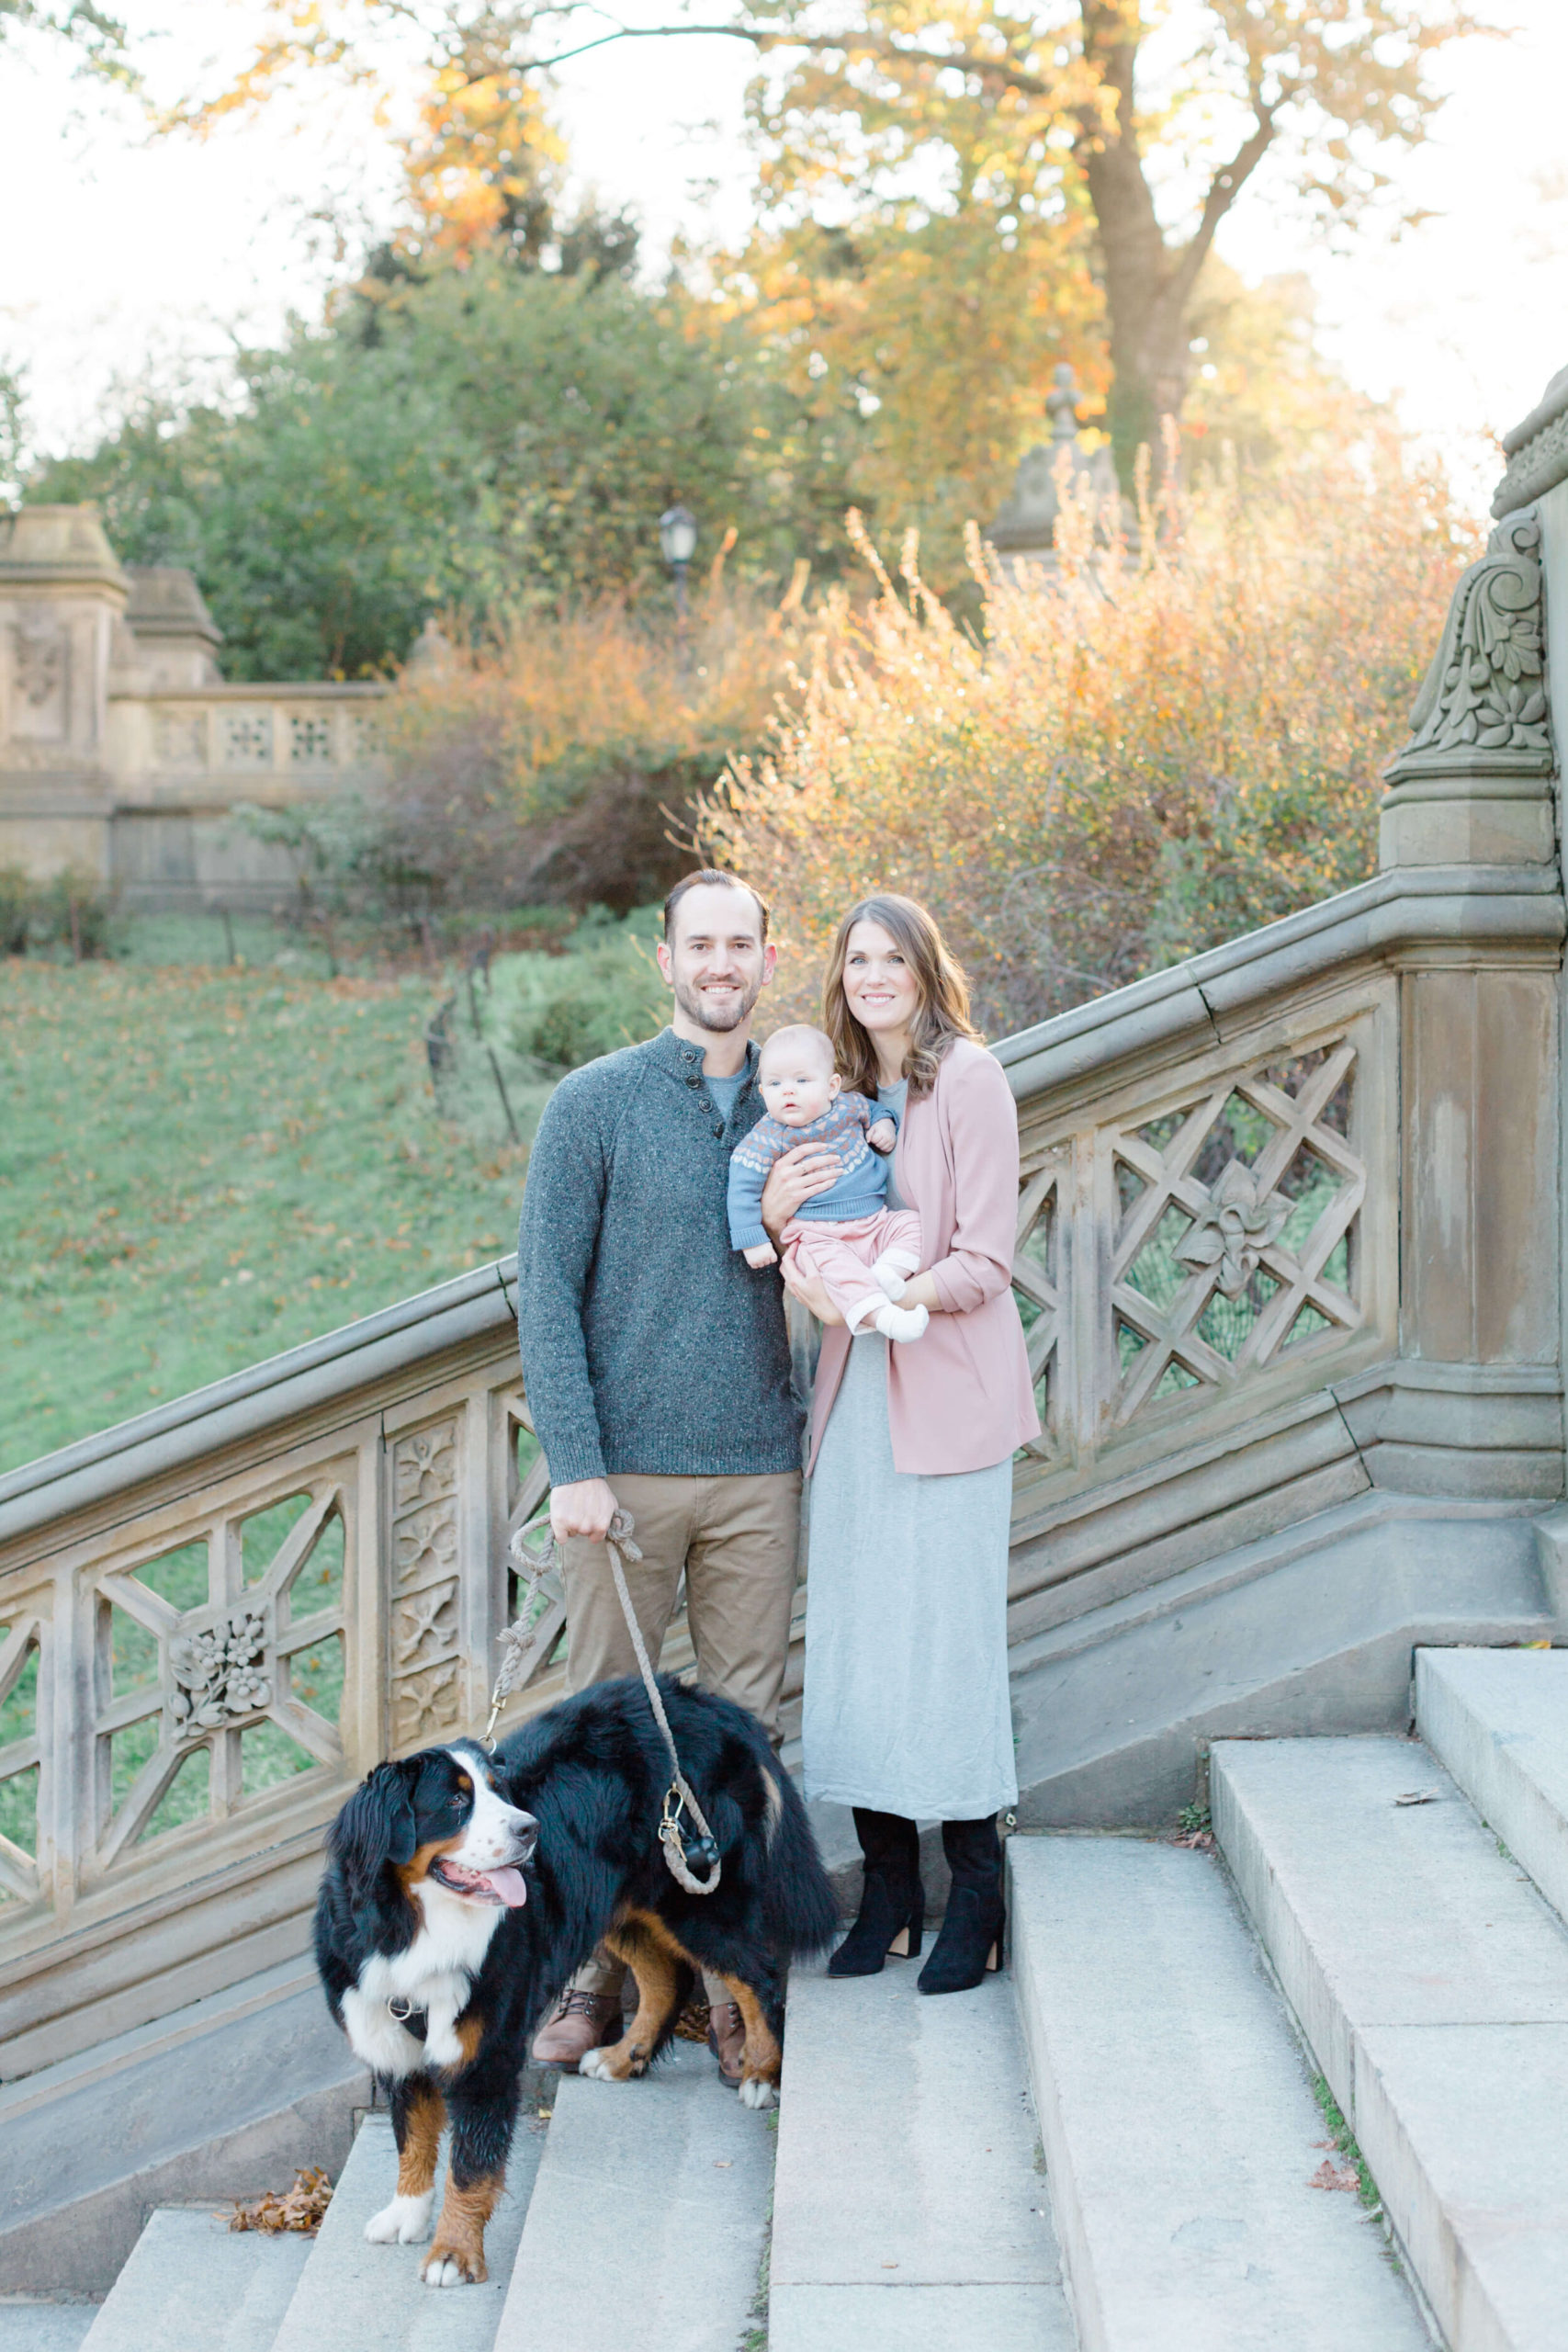 NYC Family Photographer, Jacqueline Clair, features a beautiful family session in Central Park